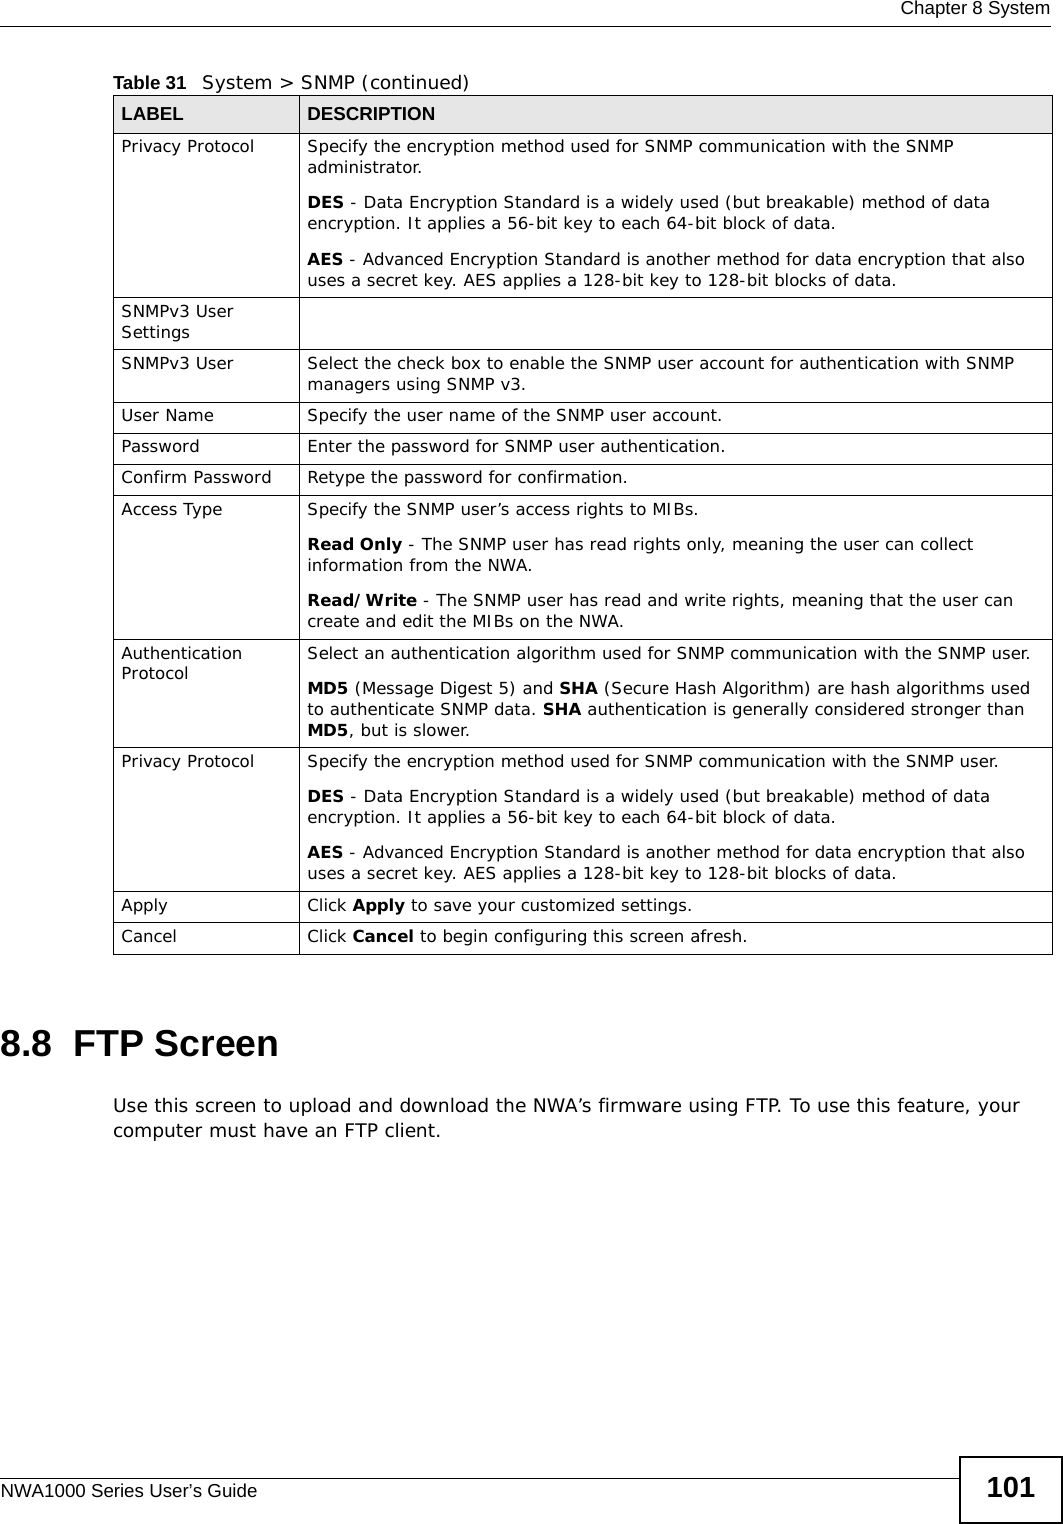  Chapter 8 SystemNWA1000 Series User’s Guide 1018.8  FTP ScreenUse this screen to upload and download the NWA’s firmware using FTP. To use this feature, your computer must have an FTP client.Privacy Protocol Specify the encryption method used for SNMP communication with the SNMP administrator. DES - Data Encryption Standard is a widely used (but breakable) method of data encryption. It applies a 56-bit key to each 64-bit block of data.AES - Advanced Encryption Standard is another method for data encryption that also uses a secret key. AES applies a 128-bit key to 128-bit blocks of data.SNMPv3 User Settings SNMPv3 User Select the check box to enable the SNMP user account for authentication with SNMP managers using SNMP v3. User Name Specify the user name of the SNMP user account.Password Enter the password for SNMP user authentication. Confirm Password Retype the password for confirmation.Access Type Specify the SNMP user’s access rights to MIBs.Read Only - The SNMP user has read rights only, meaning the user can collect information from the NWA.Read/Write - The SNMP user has read and write rights, meaning that the user can create and edit the MIBs on the NWA.Authentication Protocol Select an authentication algorithm used for SNMP communication with the SNMP user.MD5 (Message Digest 5) and SHA (Secure Hash Algorithm) are hash algorithms used to authenticate SNMP data. SHA authentication is generally considered stronger than MD5, but is slower. Privacy Protocol Specify the encryption method used for SNMP communication with the SNMP user. DES - Data Encryption Standard is a widely used (but breakable) method of data encryption. It applies a 56-bit key to each 64-bit block of data.AES - Advanced Encryption Standard is another method for data encryption that also uses a secret key. AES applies a 128-bit key to 128-bit blocks of data.Apply Click Apply to save your customized settings. Cancel Click Cancel to begin configuring this screen afresh.Table 31   System &gt; SNMP (continued)LABEL DESCRIPTION